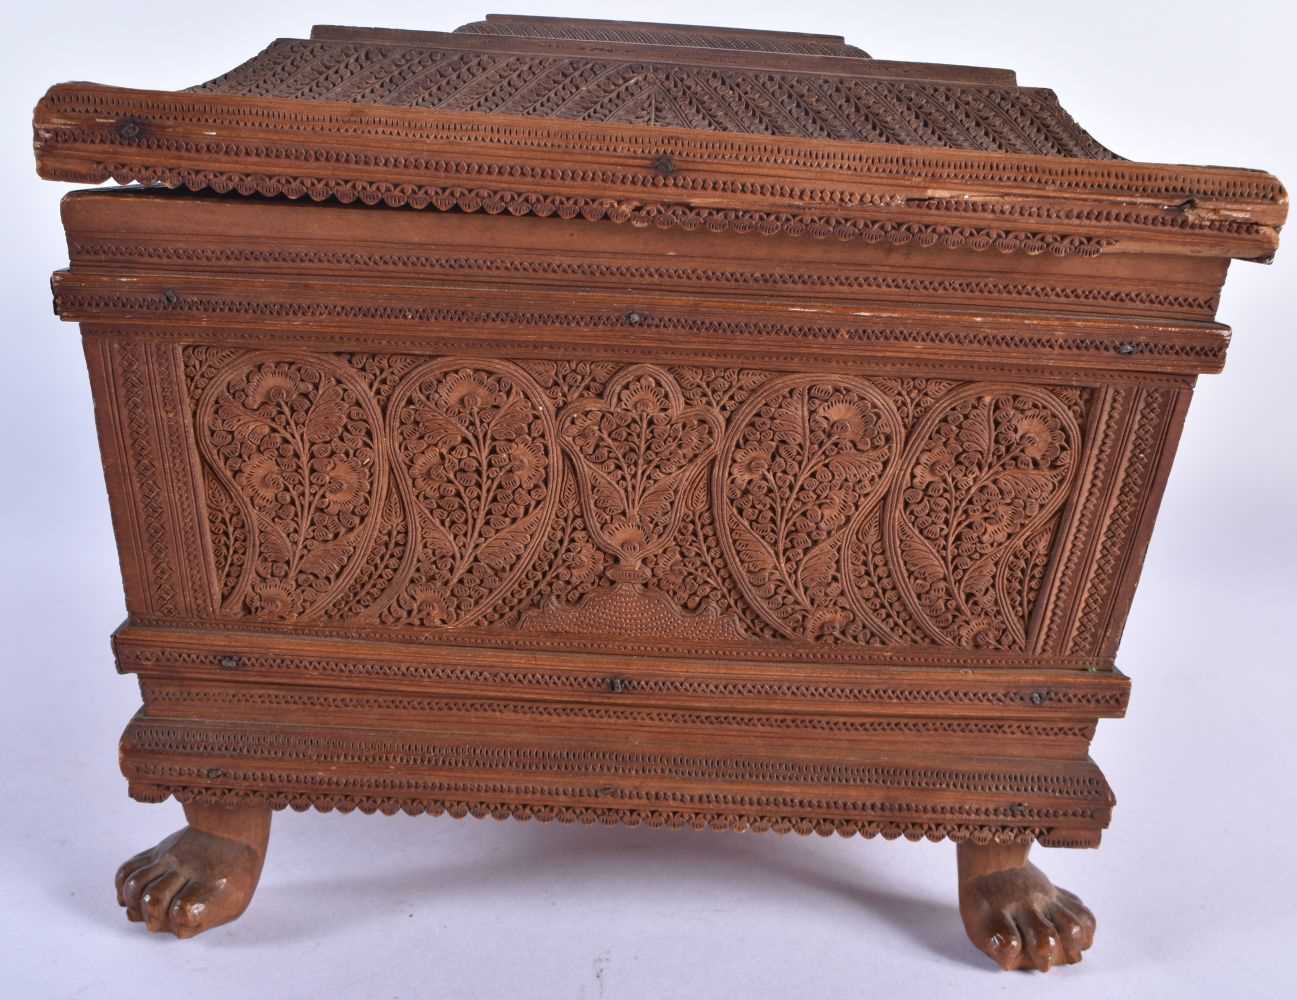 A FINE MID 19TH CENTURY ANGLO INDIAN CARVED WOOD CASKET AND COVER decorated with mythical birds, - Image 5 of 12